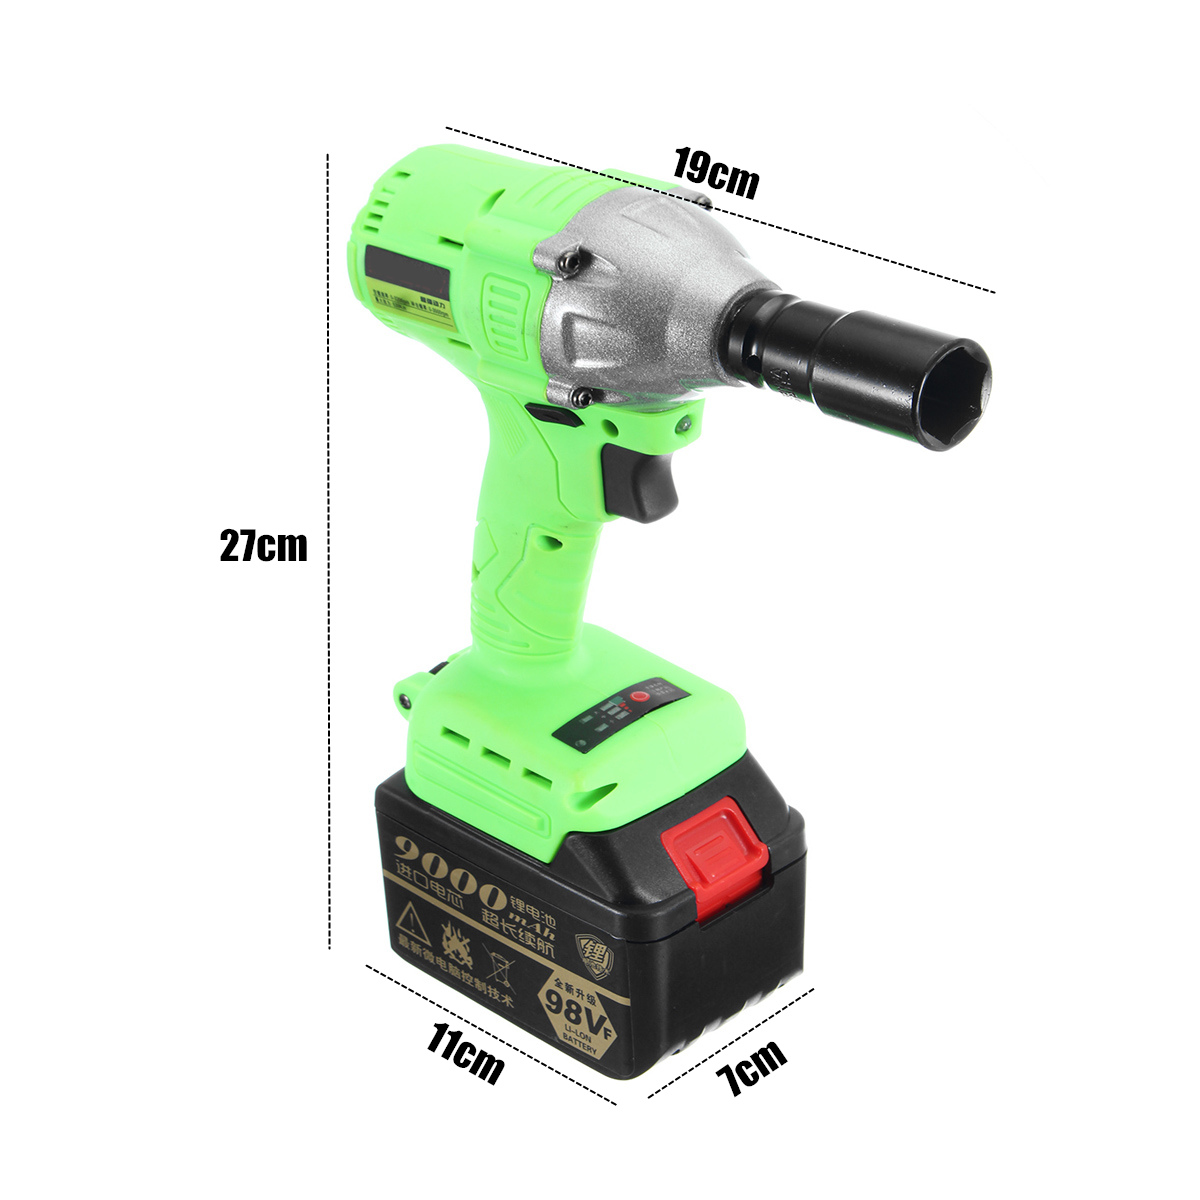 98V-9000mAh-Cordless-Lithium-Ion-Electric-Impact-Wrench-Power-Wrenche-Brushless-Motor-1270466-5